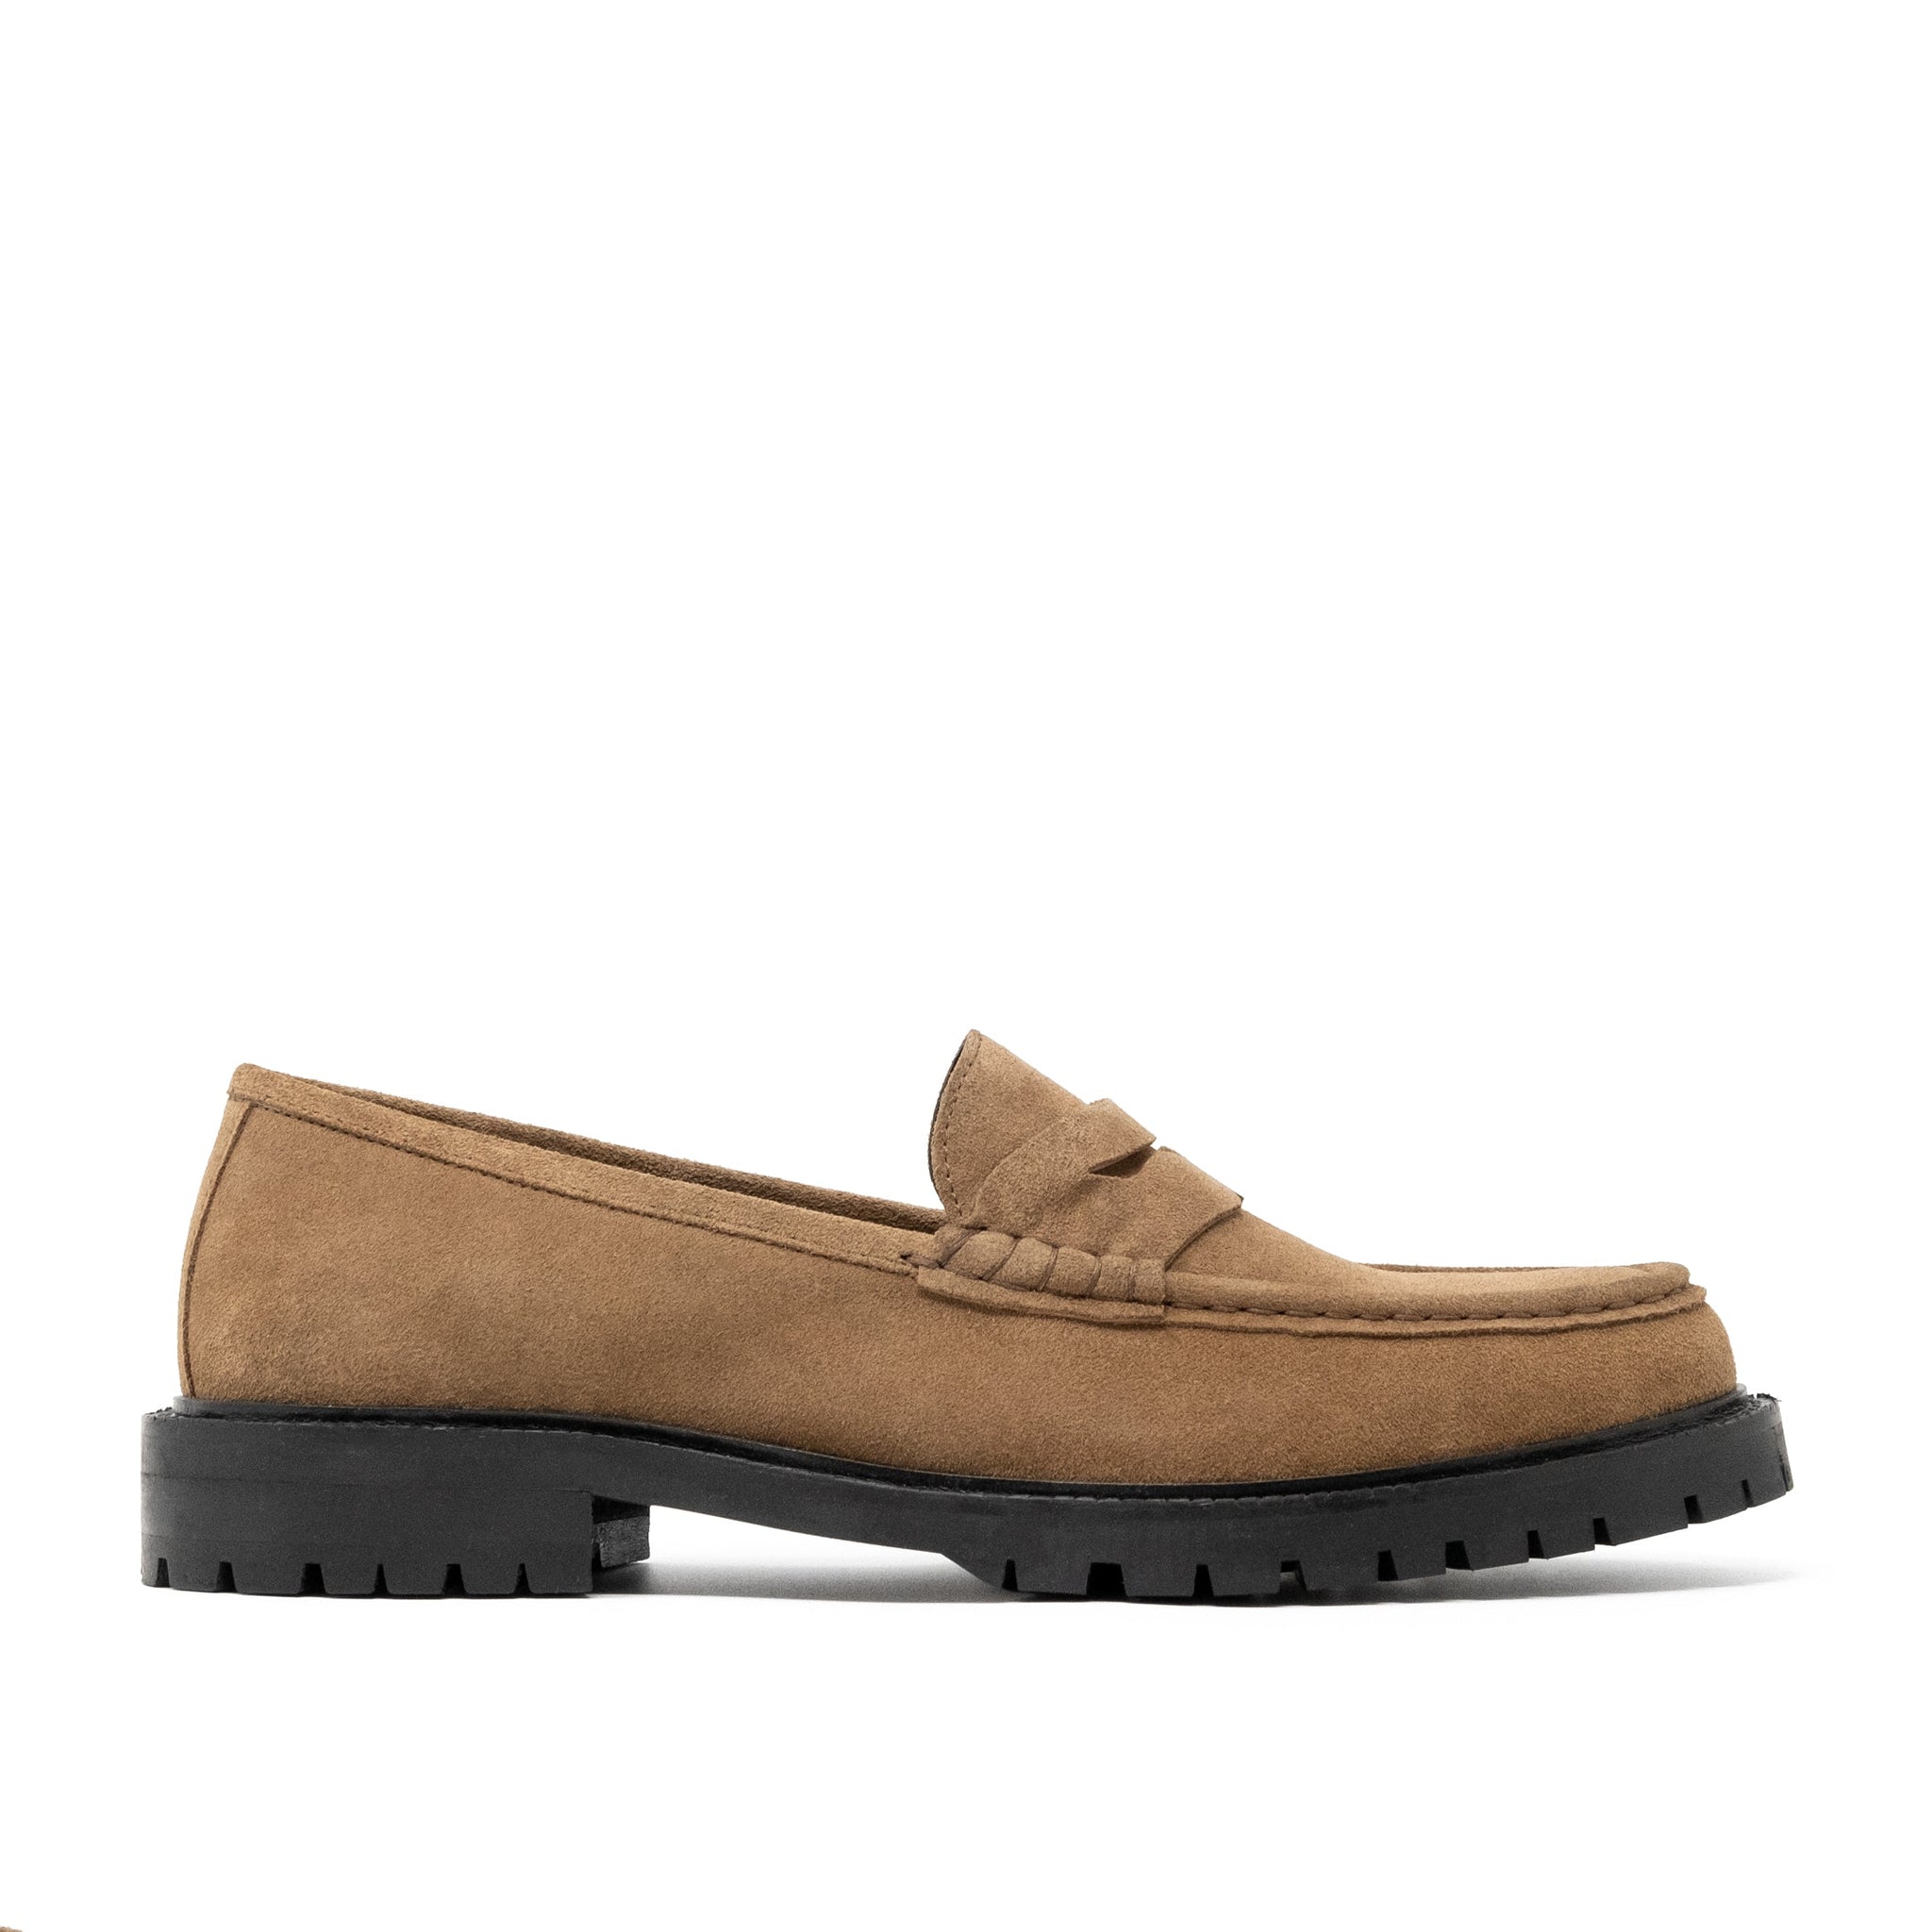 Walk London Campus Saddle Loafer - Tan Suede - Official Site